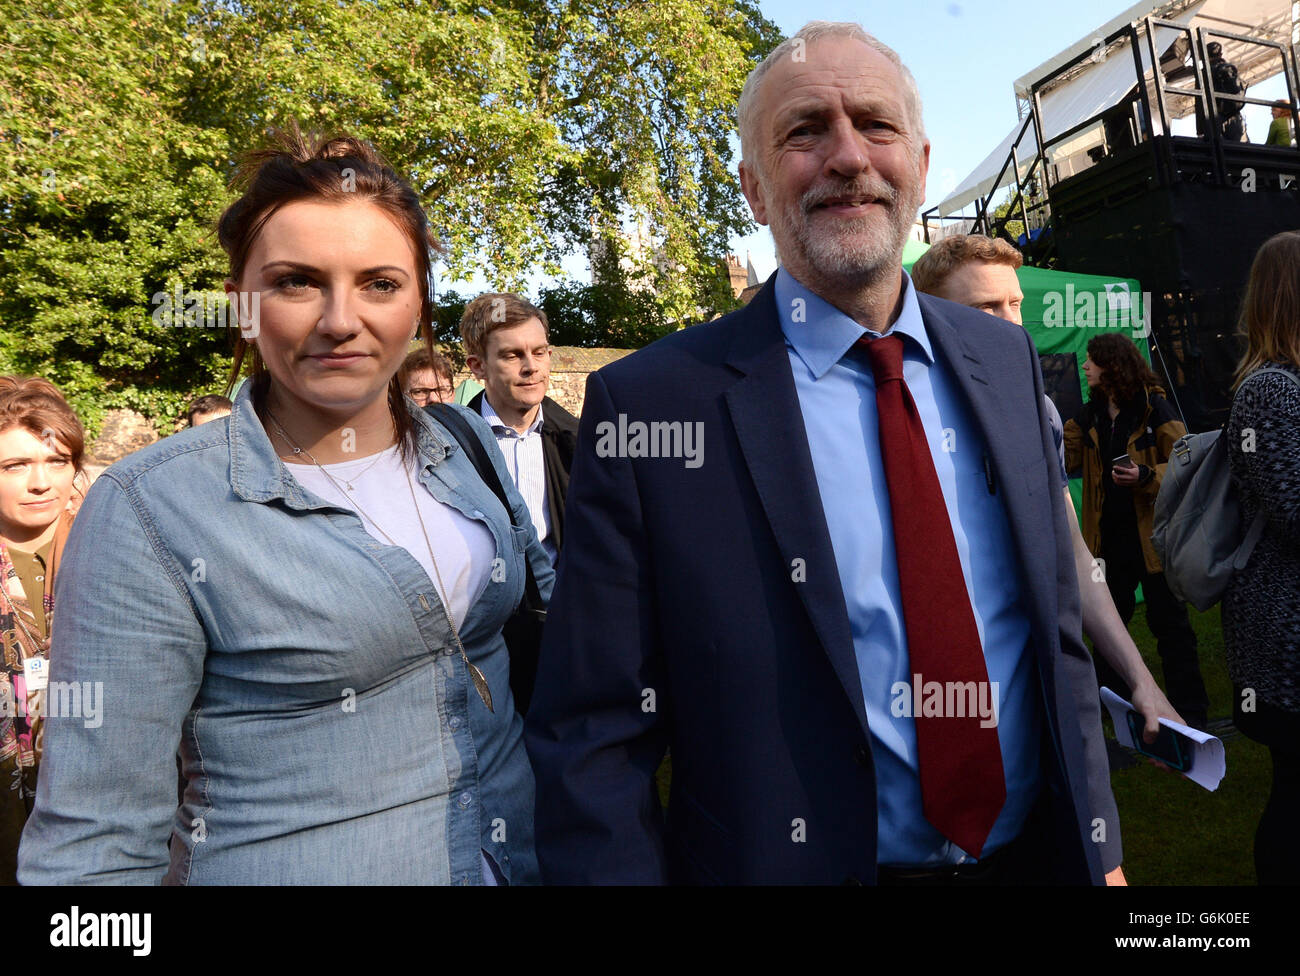 Labour Party leader Jeremy Corbyn on College Green in Westminster, London, after Britain voted to leave the European Union in an historic referendum which has thrown Westminster politics into disarray and sent the pound tumbling on the world markets. Stock Photo